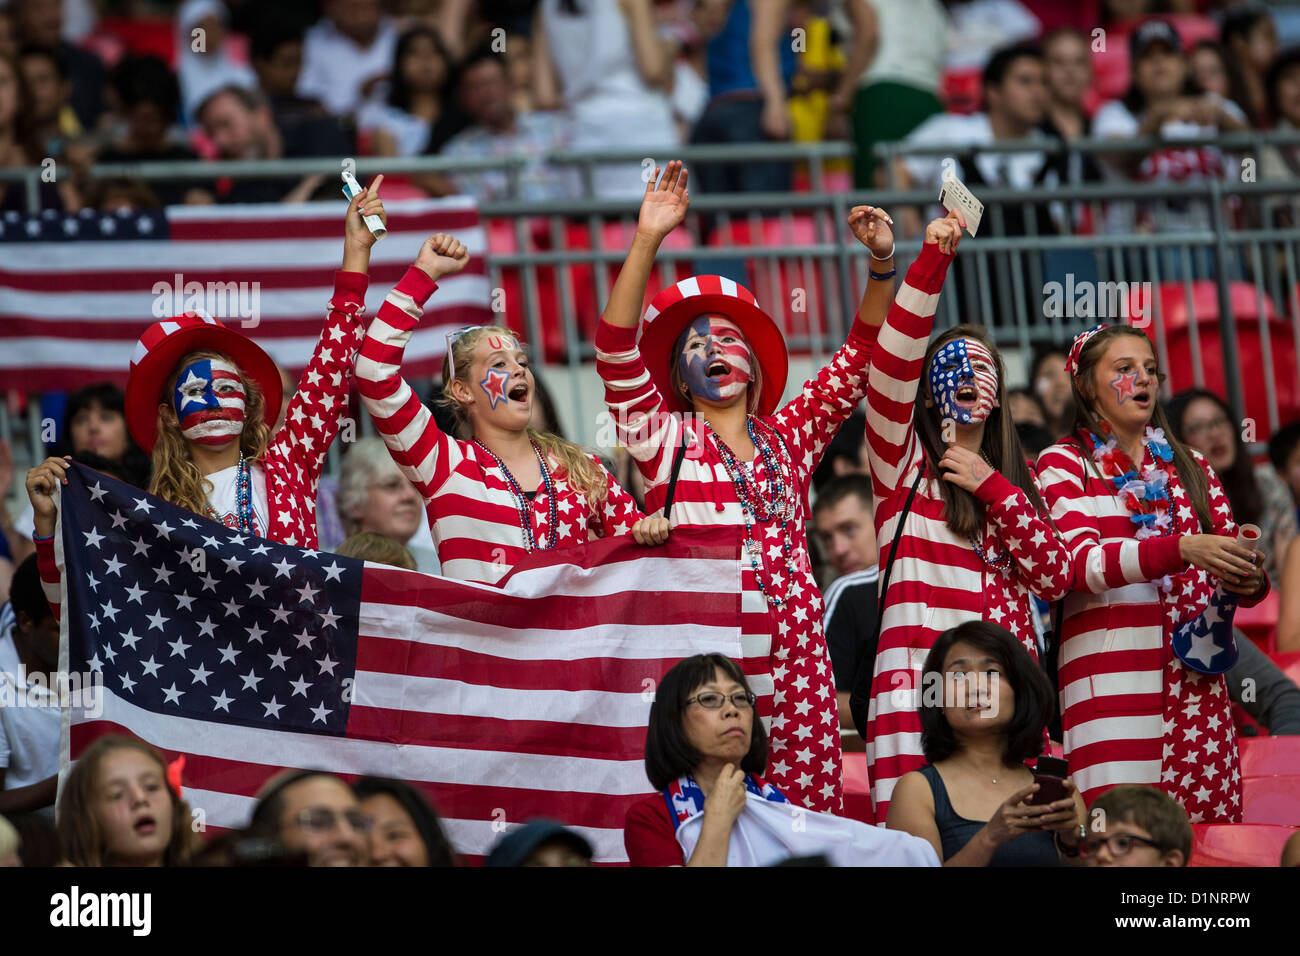 USA fans watch USA wins gold over Japan in Women's Football (soccer) at the Olympic Summer Games, London 2012 Stock Photo